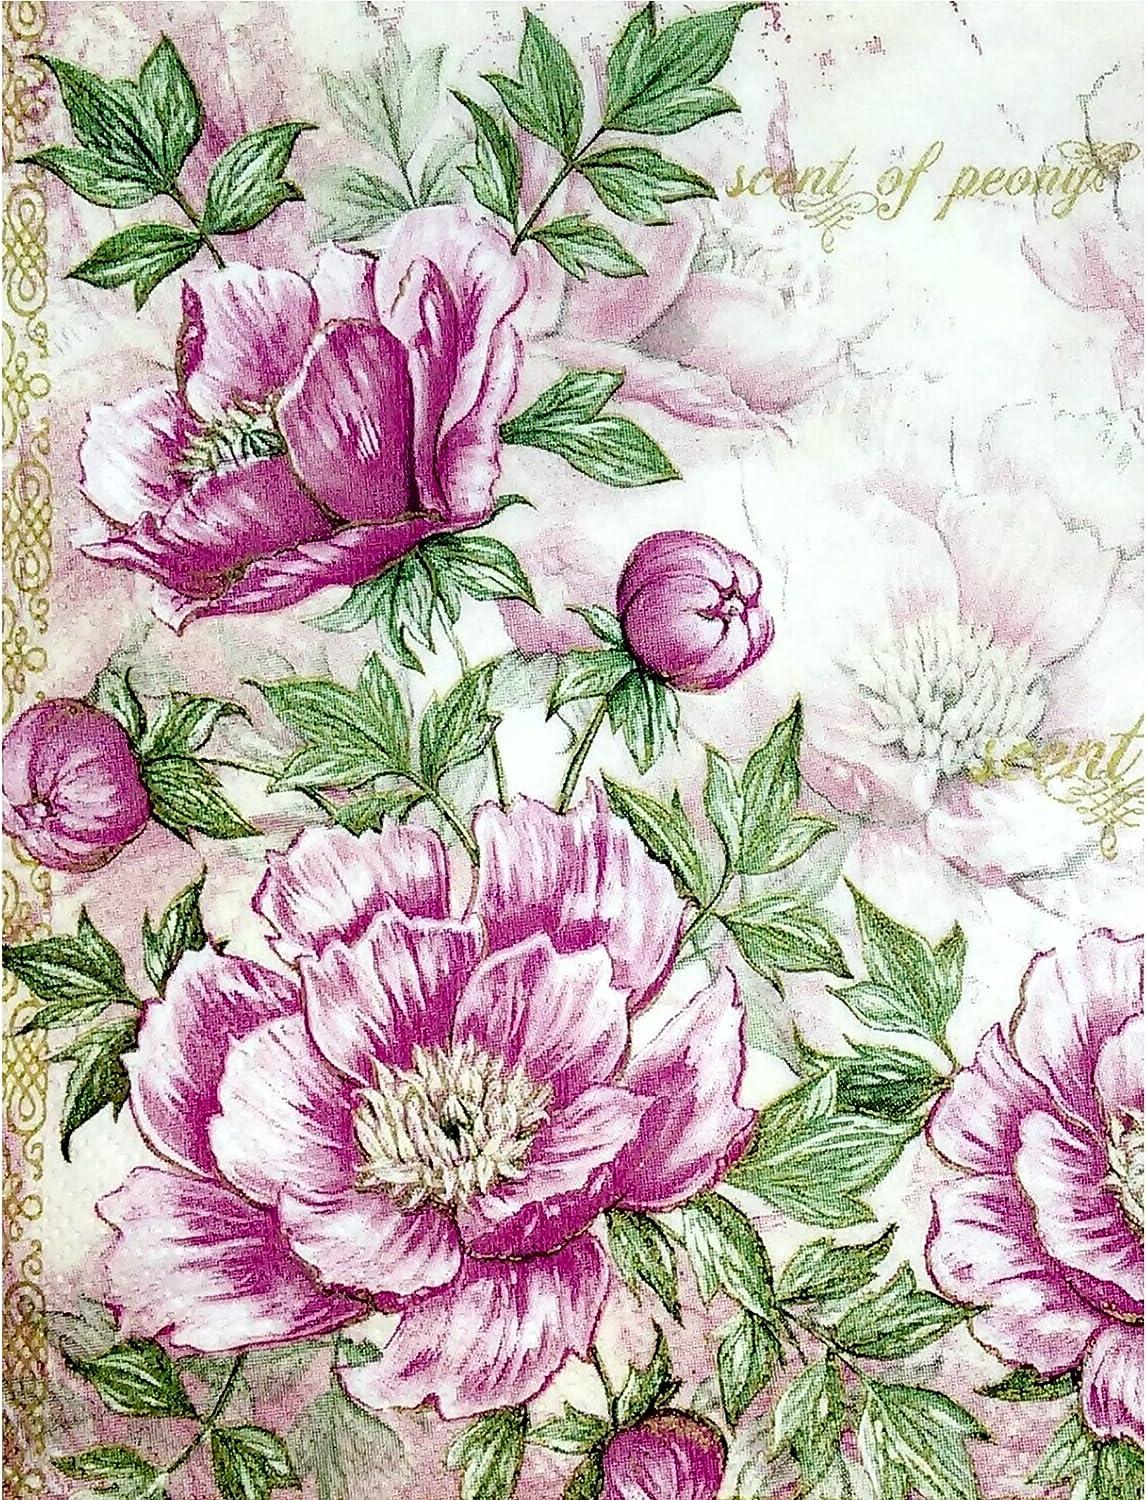 Victorian Floral Mulberry Rice Paper, 8 x 10.5 inch - 6 Unique Printed Mulberry Paper Images 30gsm Visible Fibres for Decoupage Crafts Mixed Media